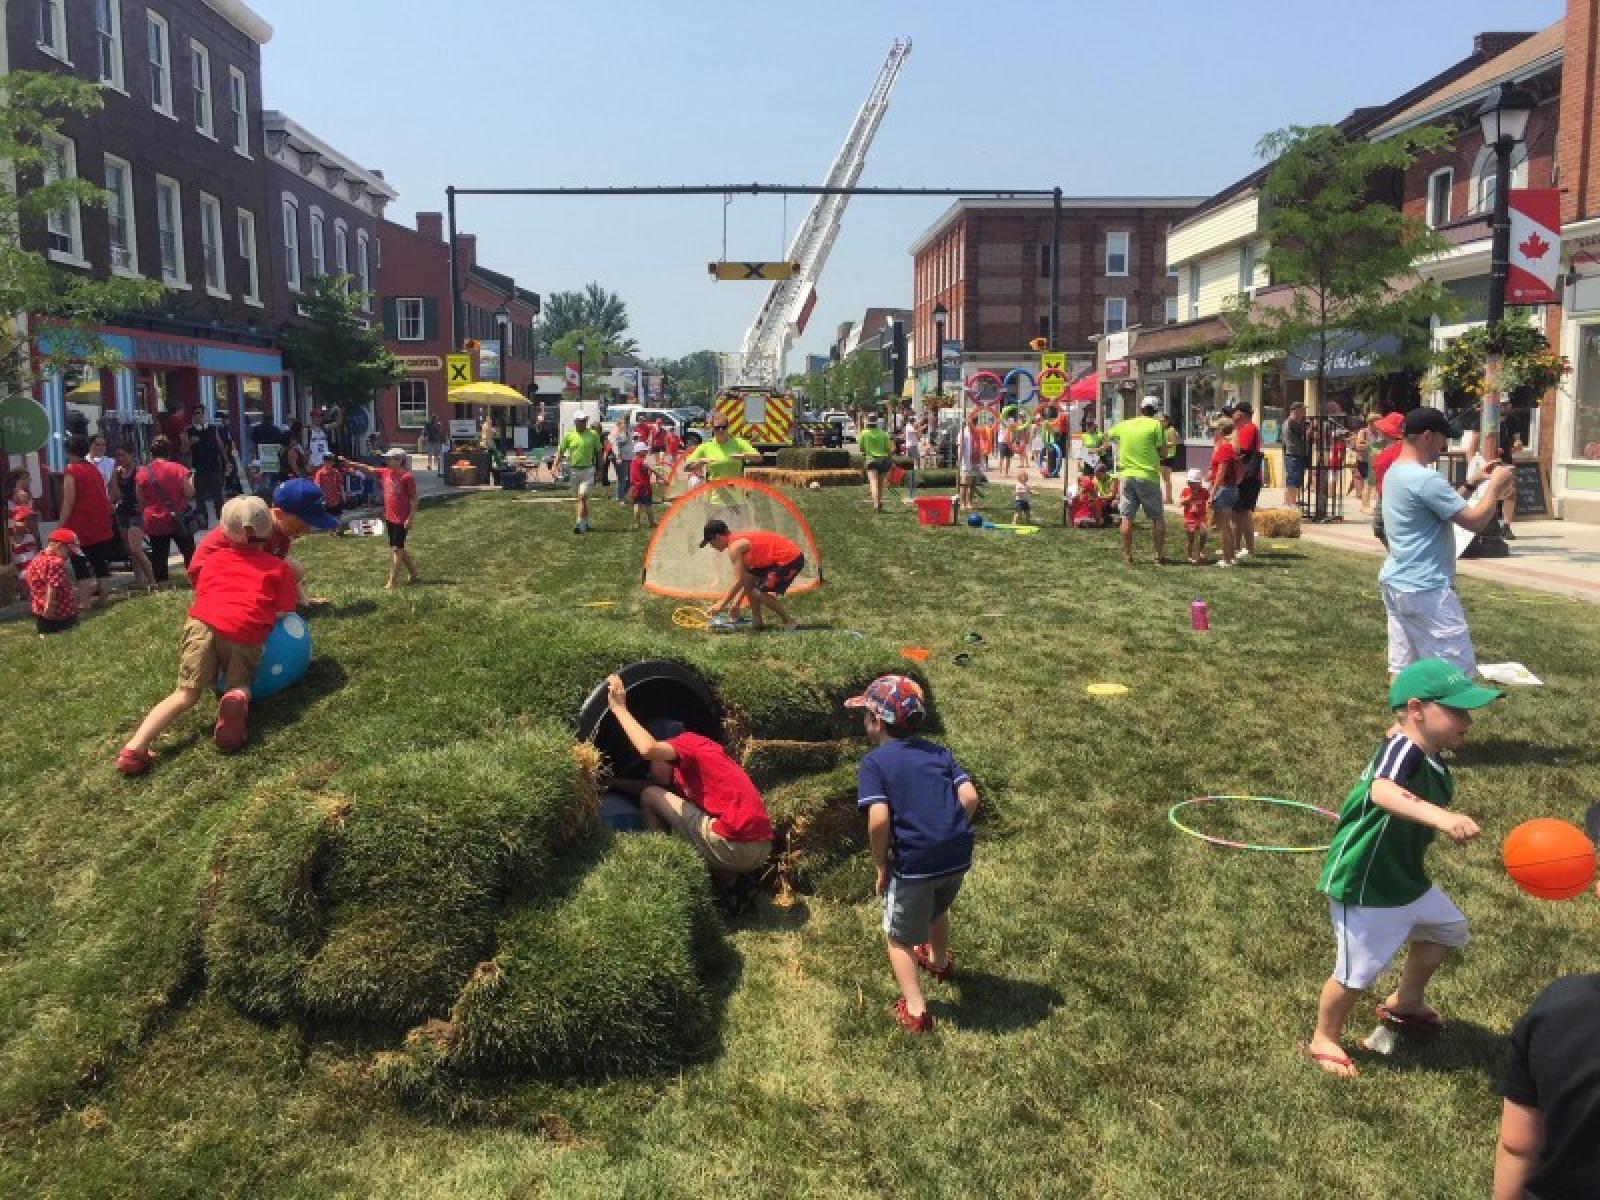 Pop up city park to teach kids the lost art of unstructured play